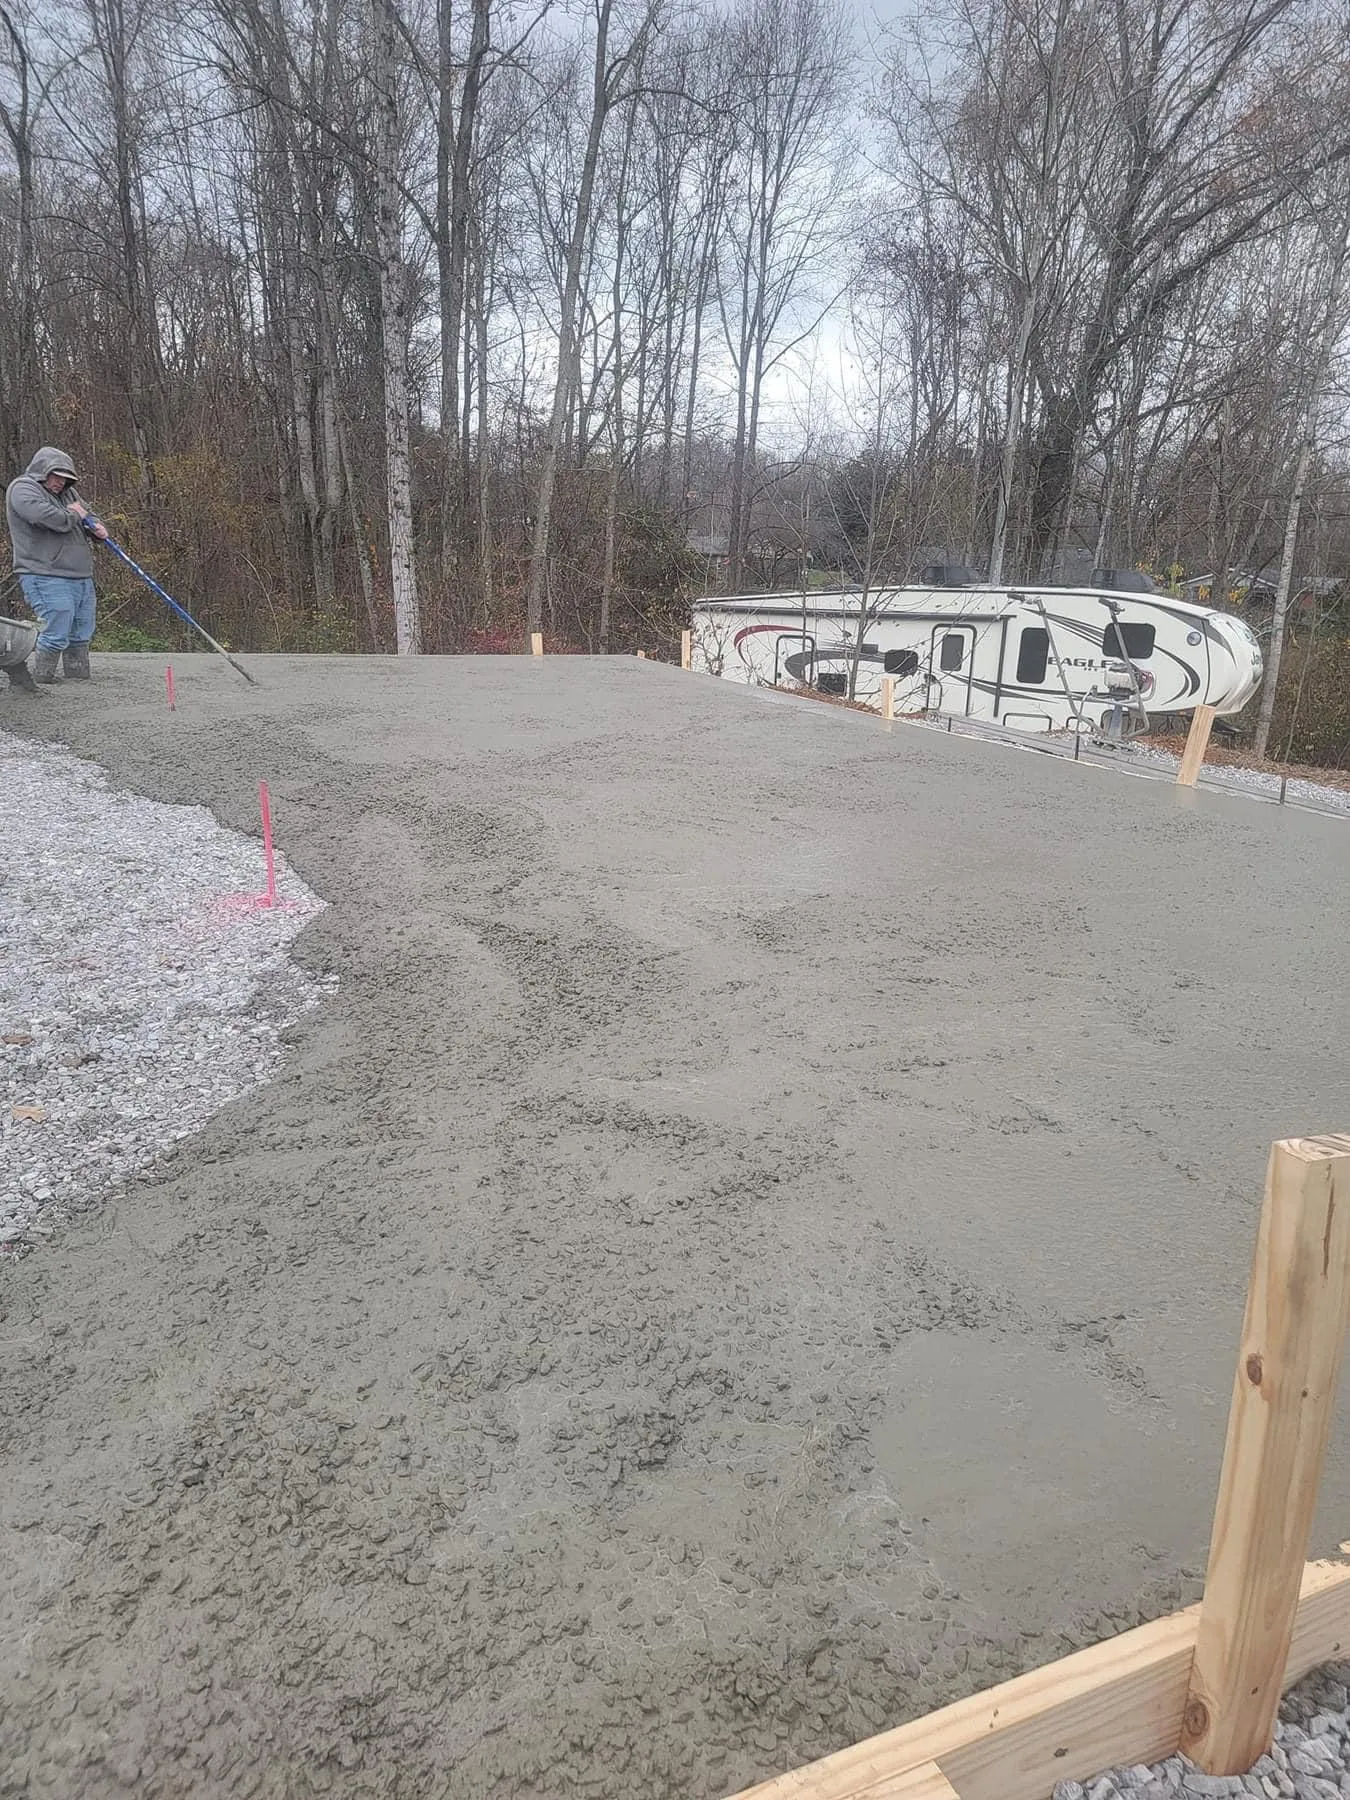 Driveways for Alloy Concrete Construction in Albany, KY